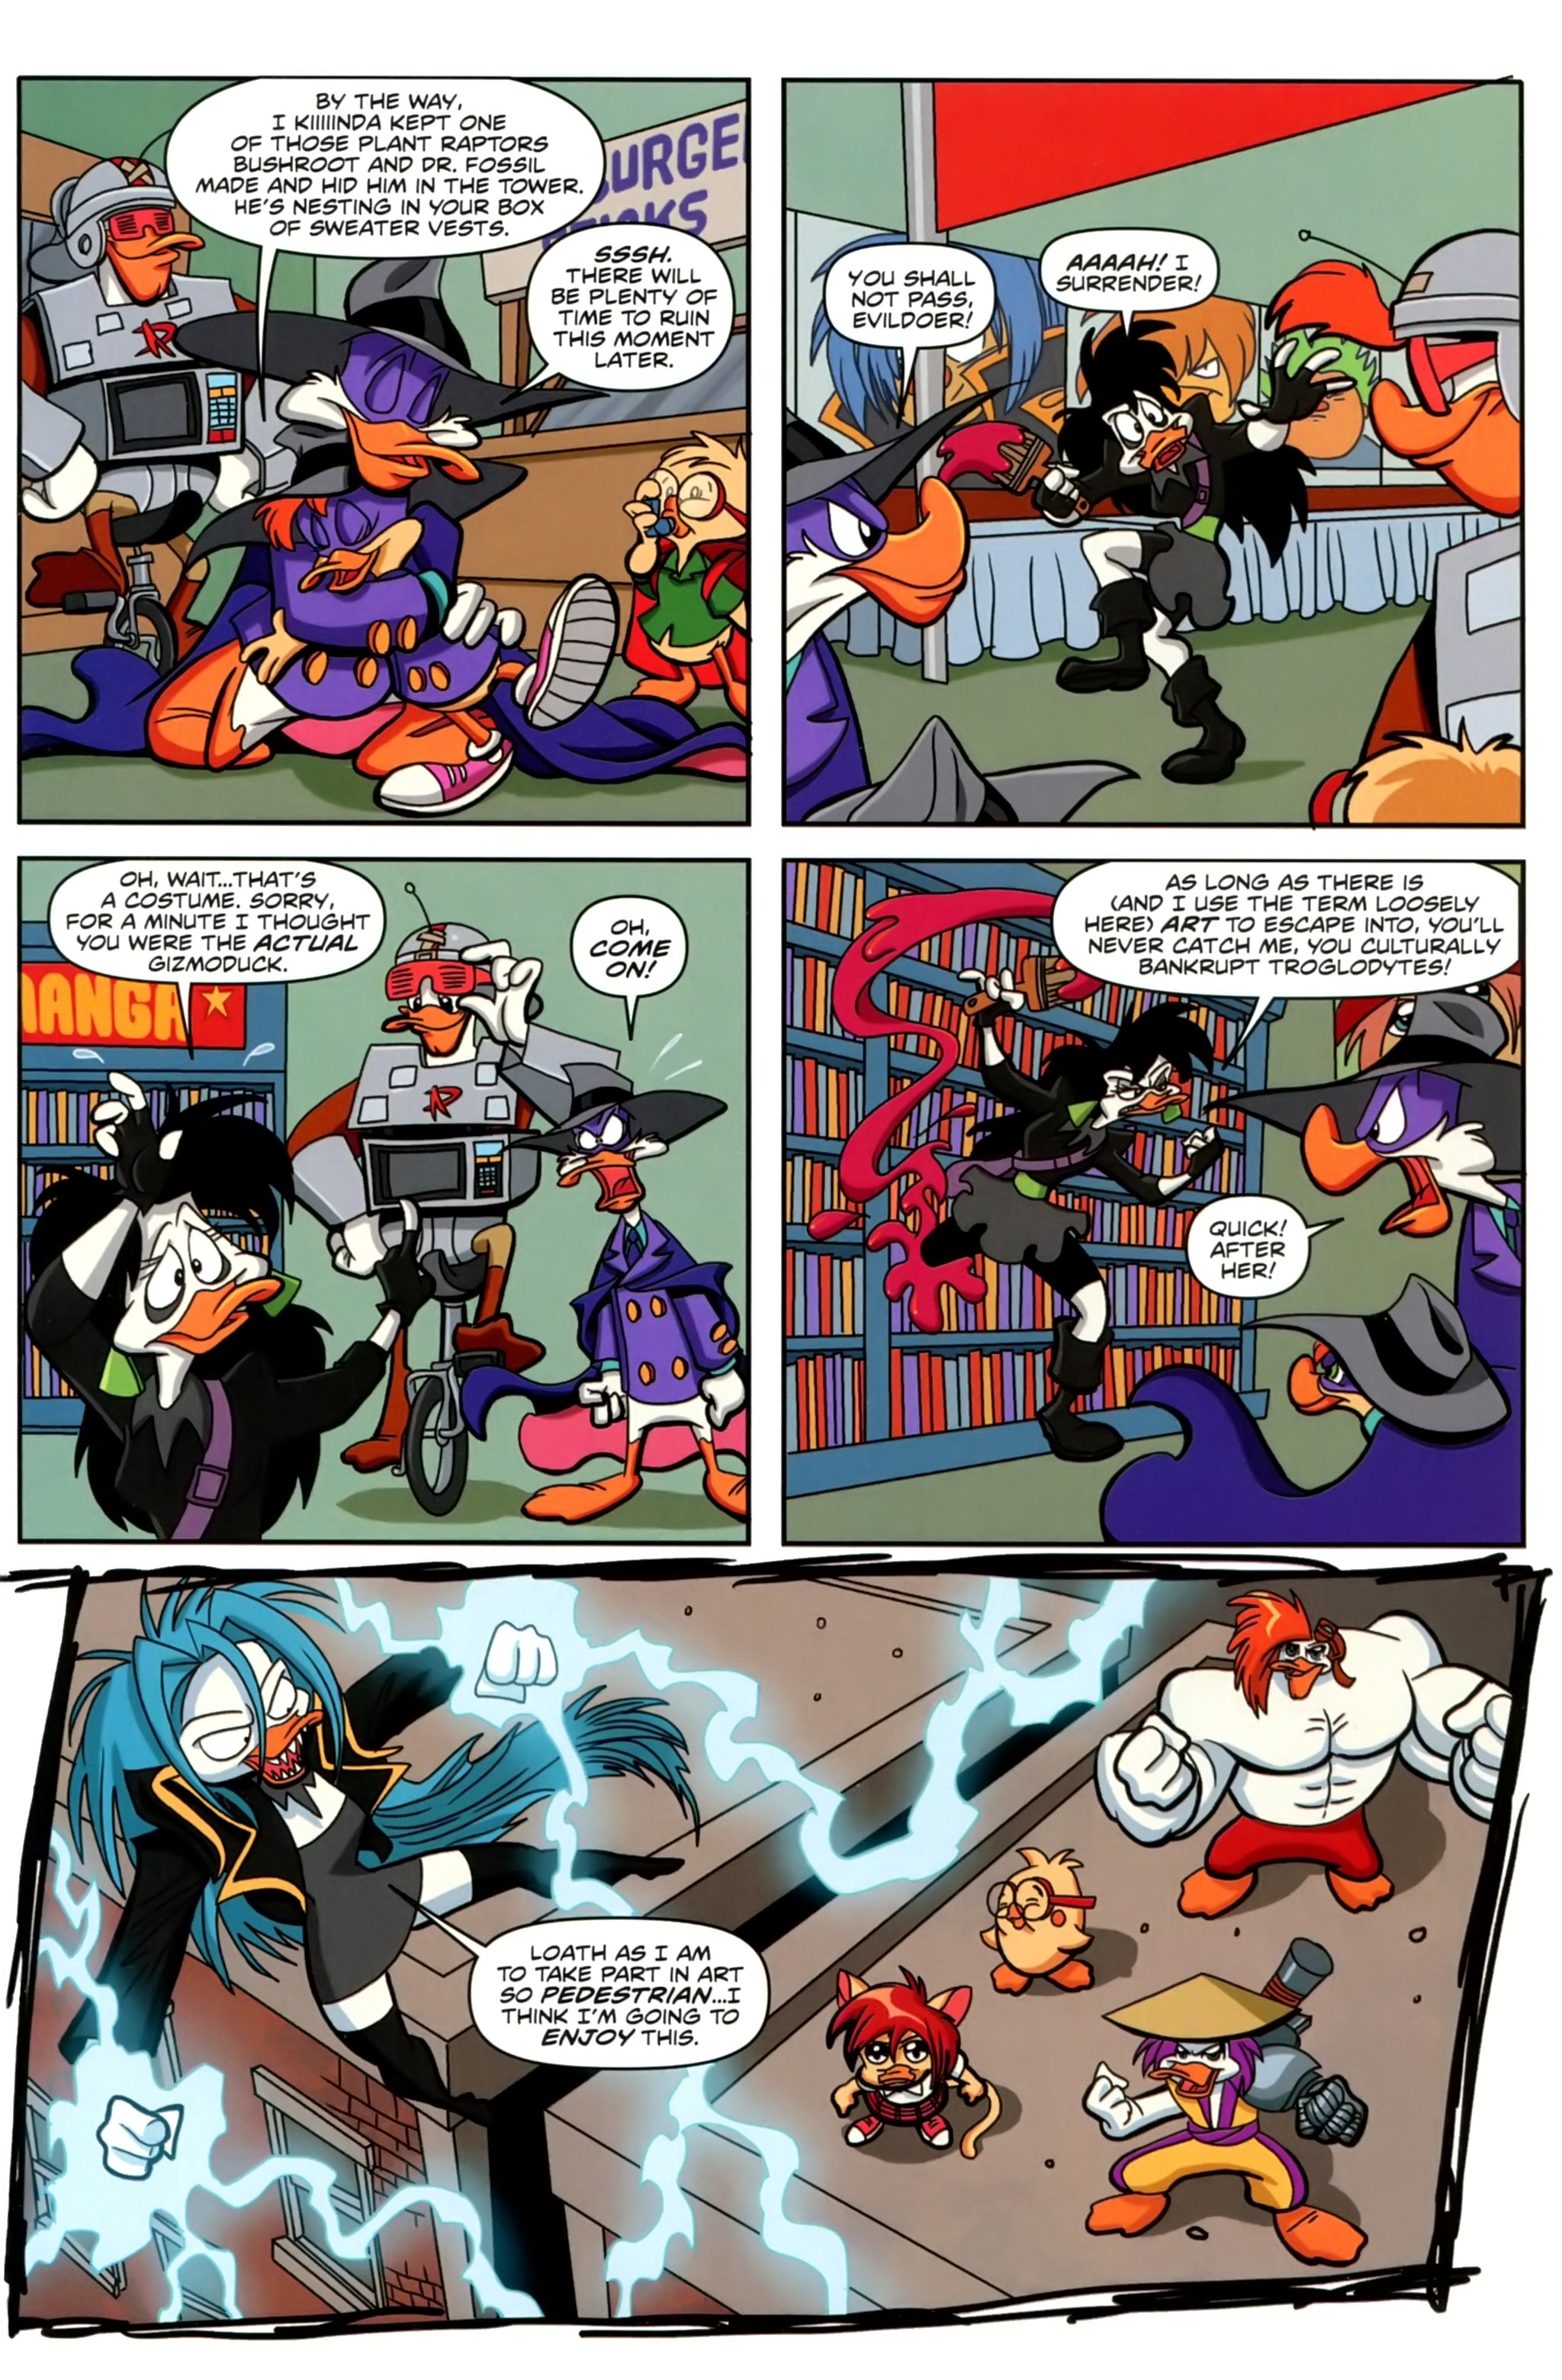 Disney Darkwing Duck 16 Chapter 6 Page 21